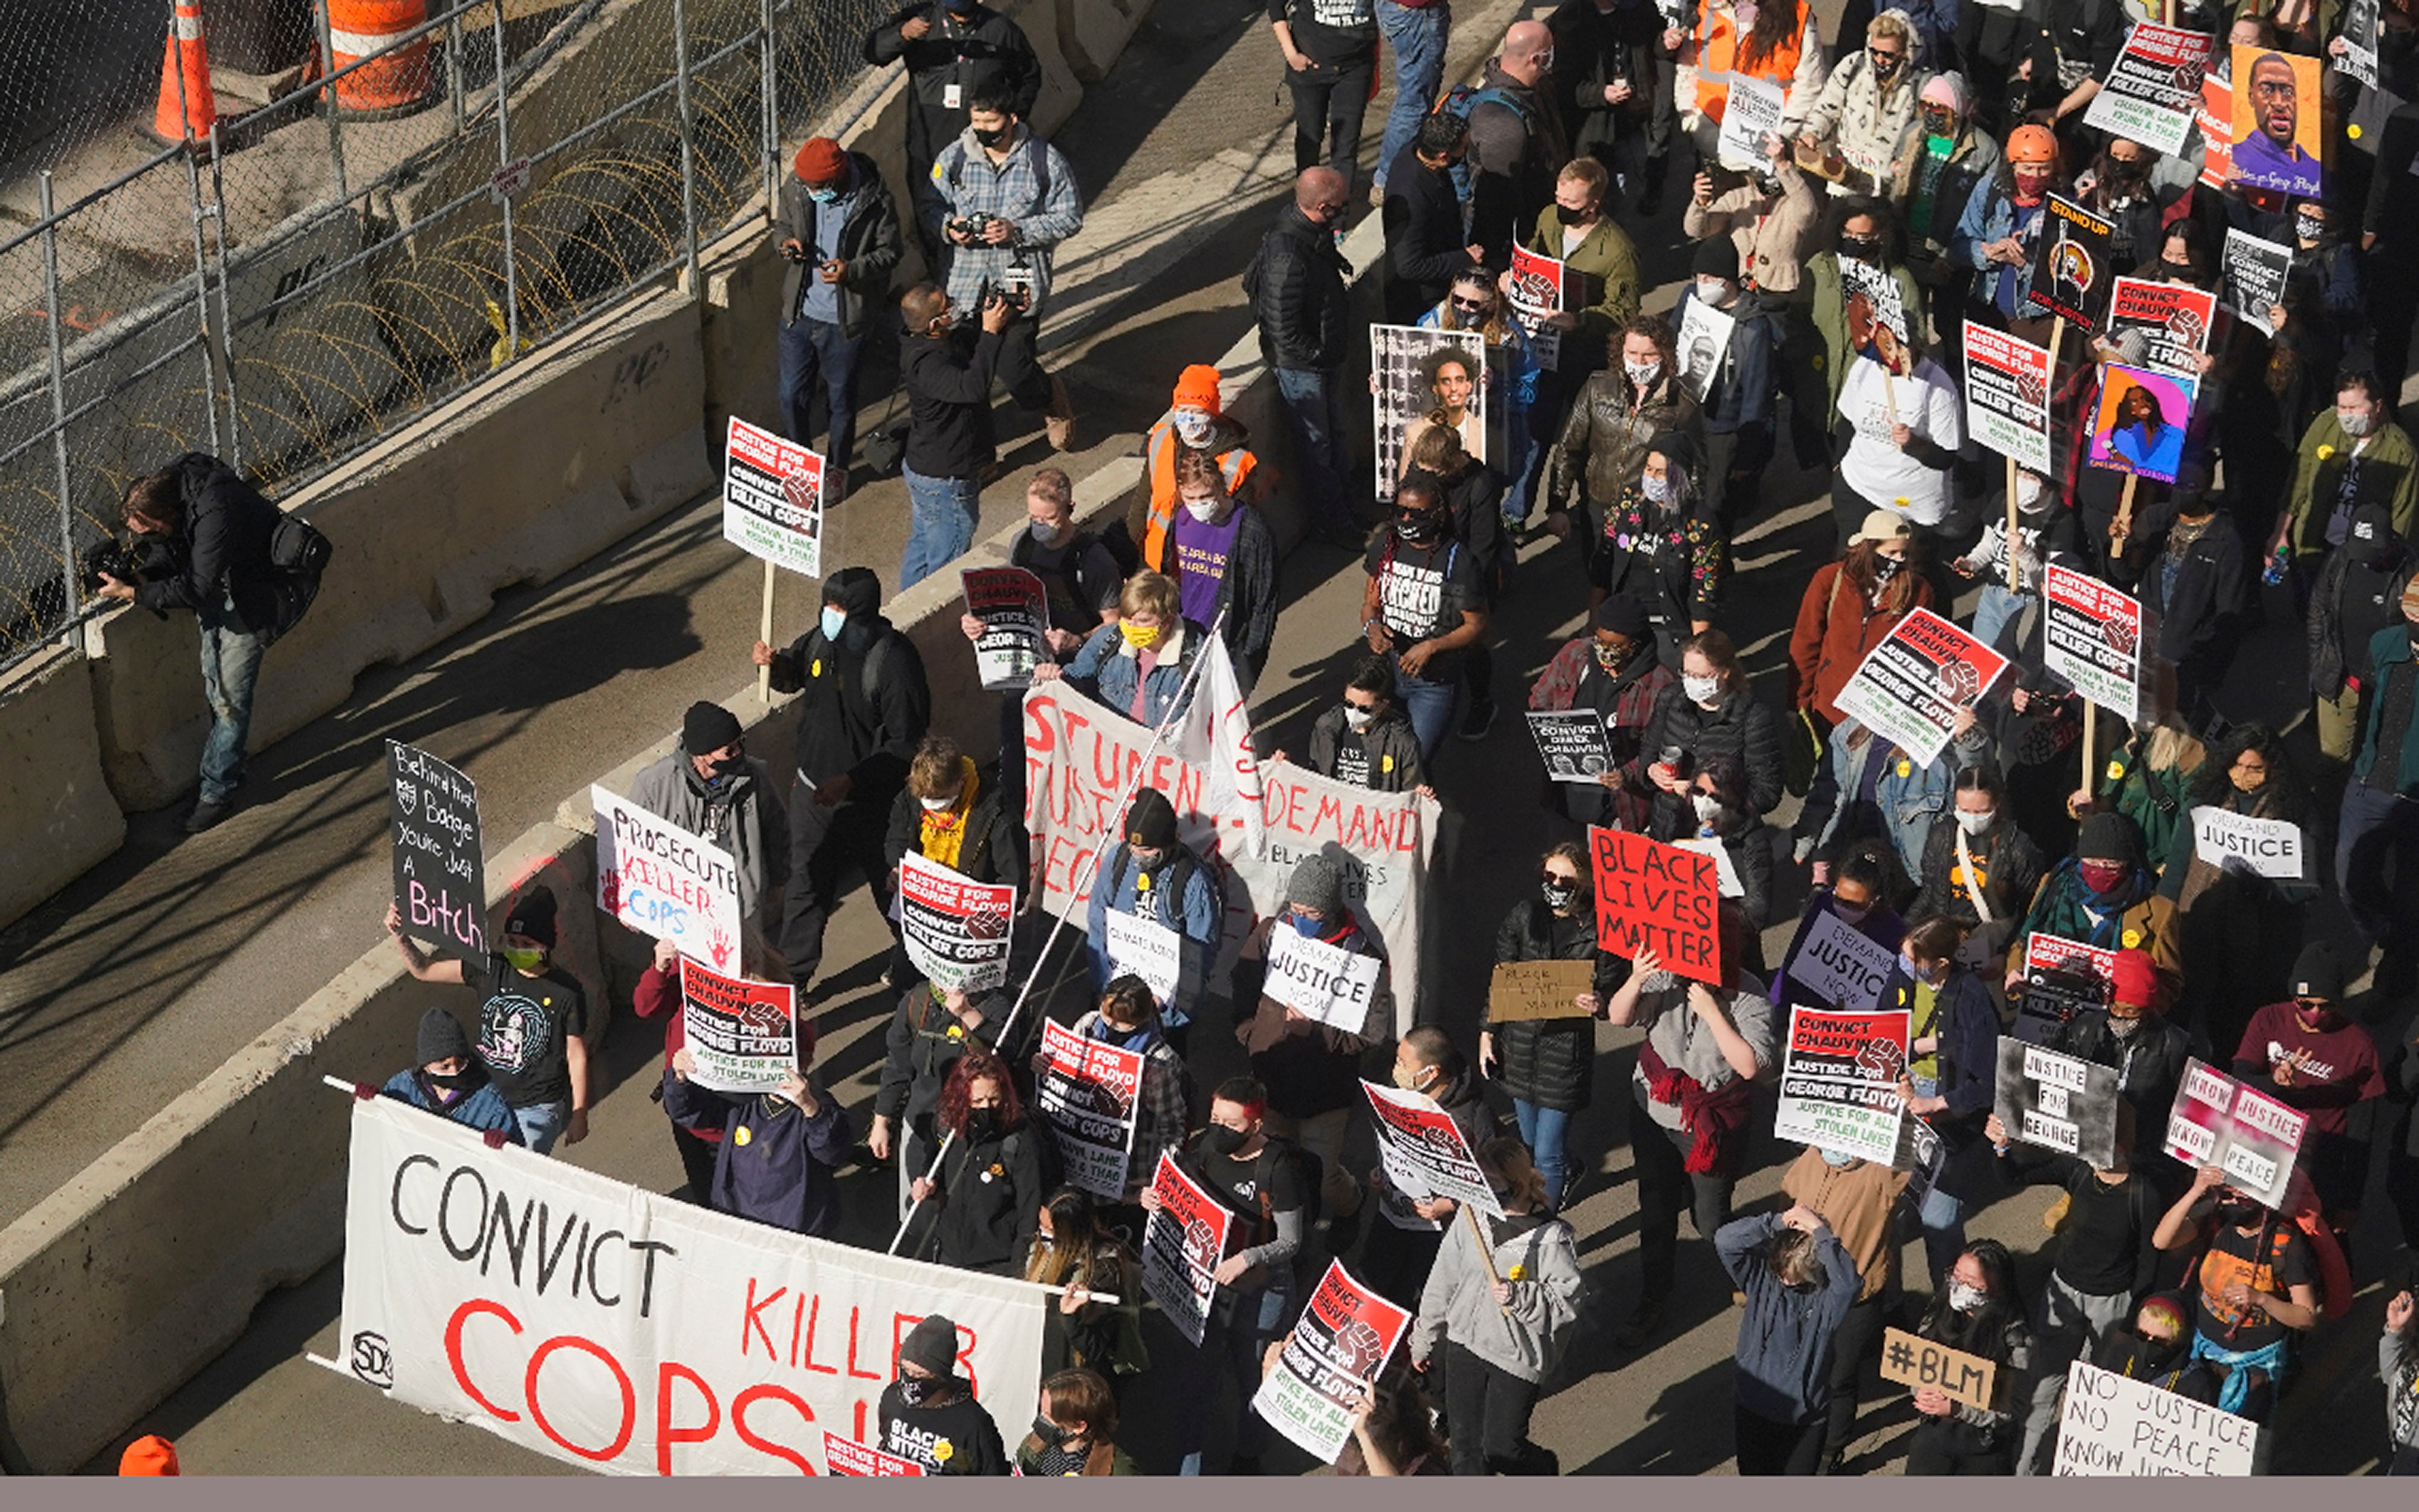 <p>Hundreds of demonstrators march through Minneapolis following protests near the Hennepin County Government Center on 8 March 2021, in Minneapolis where the trial for former Minneapolis police officer Derek Chauvin began with jury selection. </p>